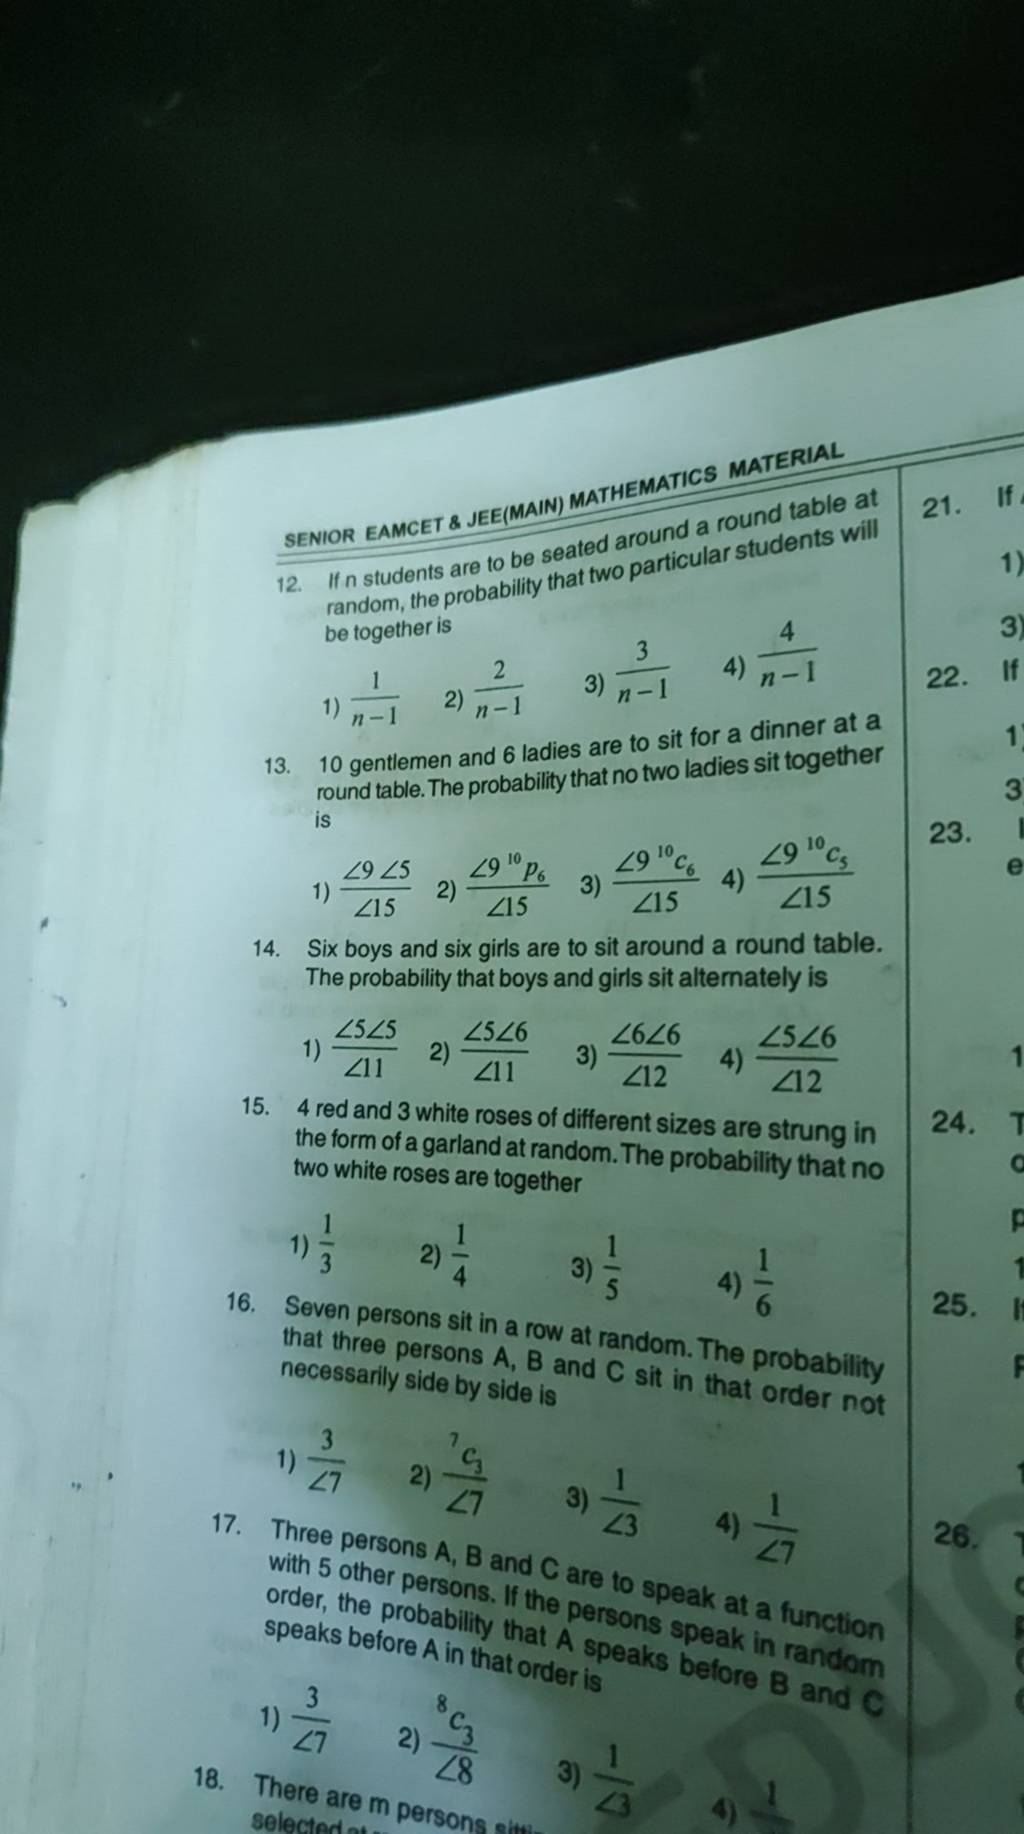 SENIOR EAMCET & JEE(MAIN) MATHEMATICS MATERIAL
12.
If n students are t